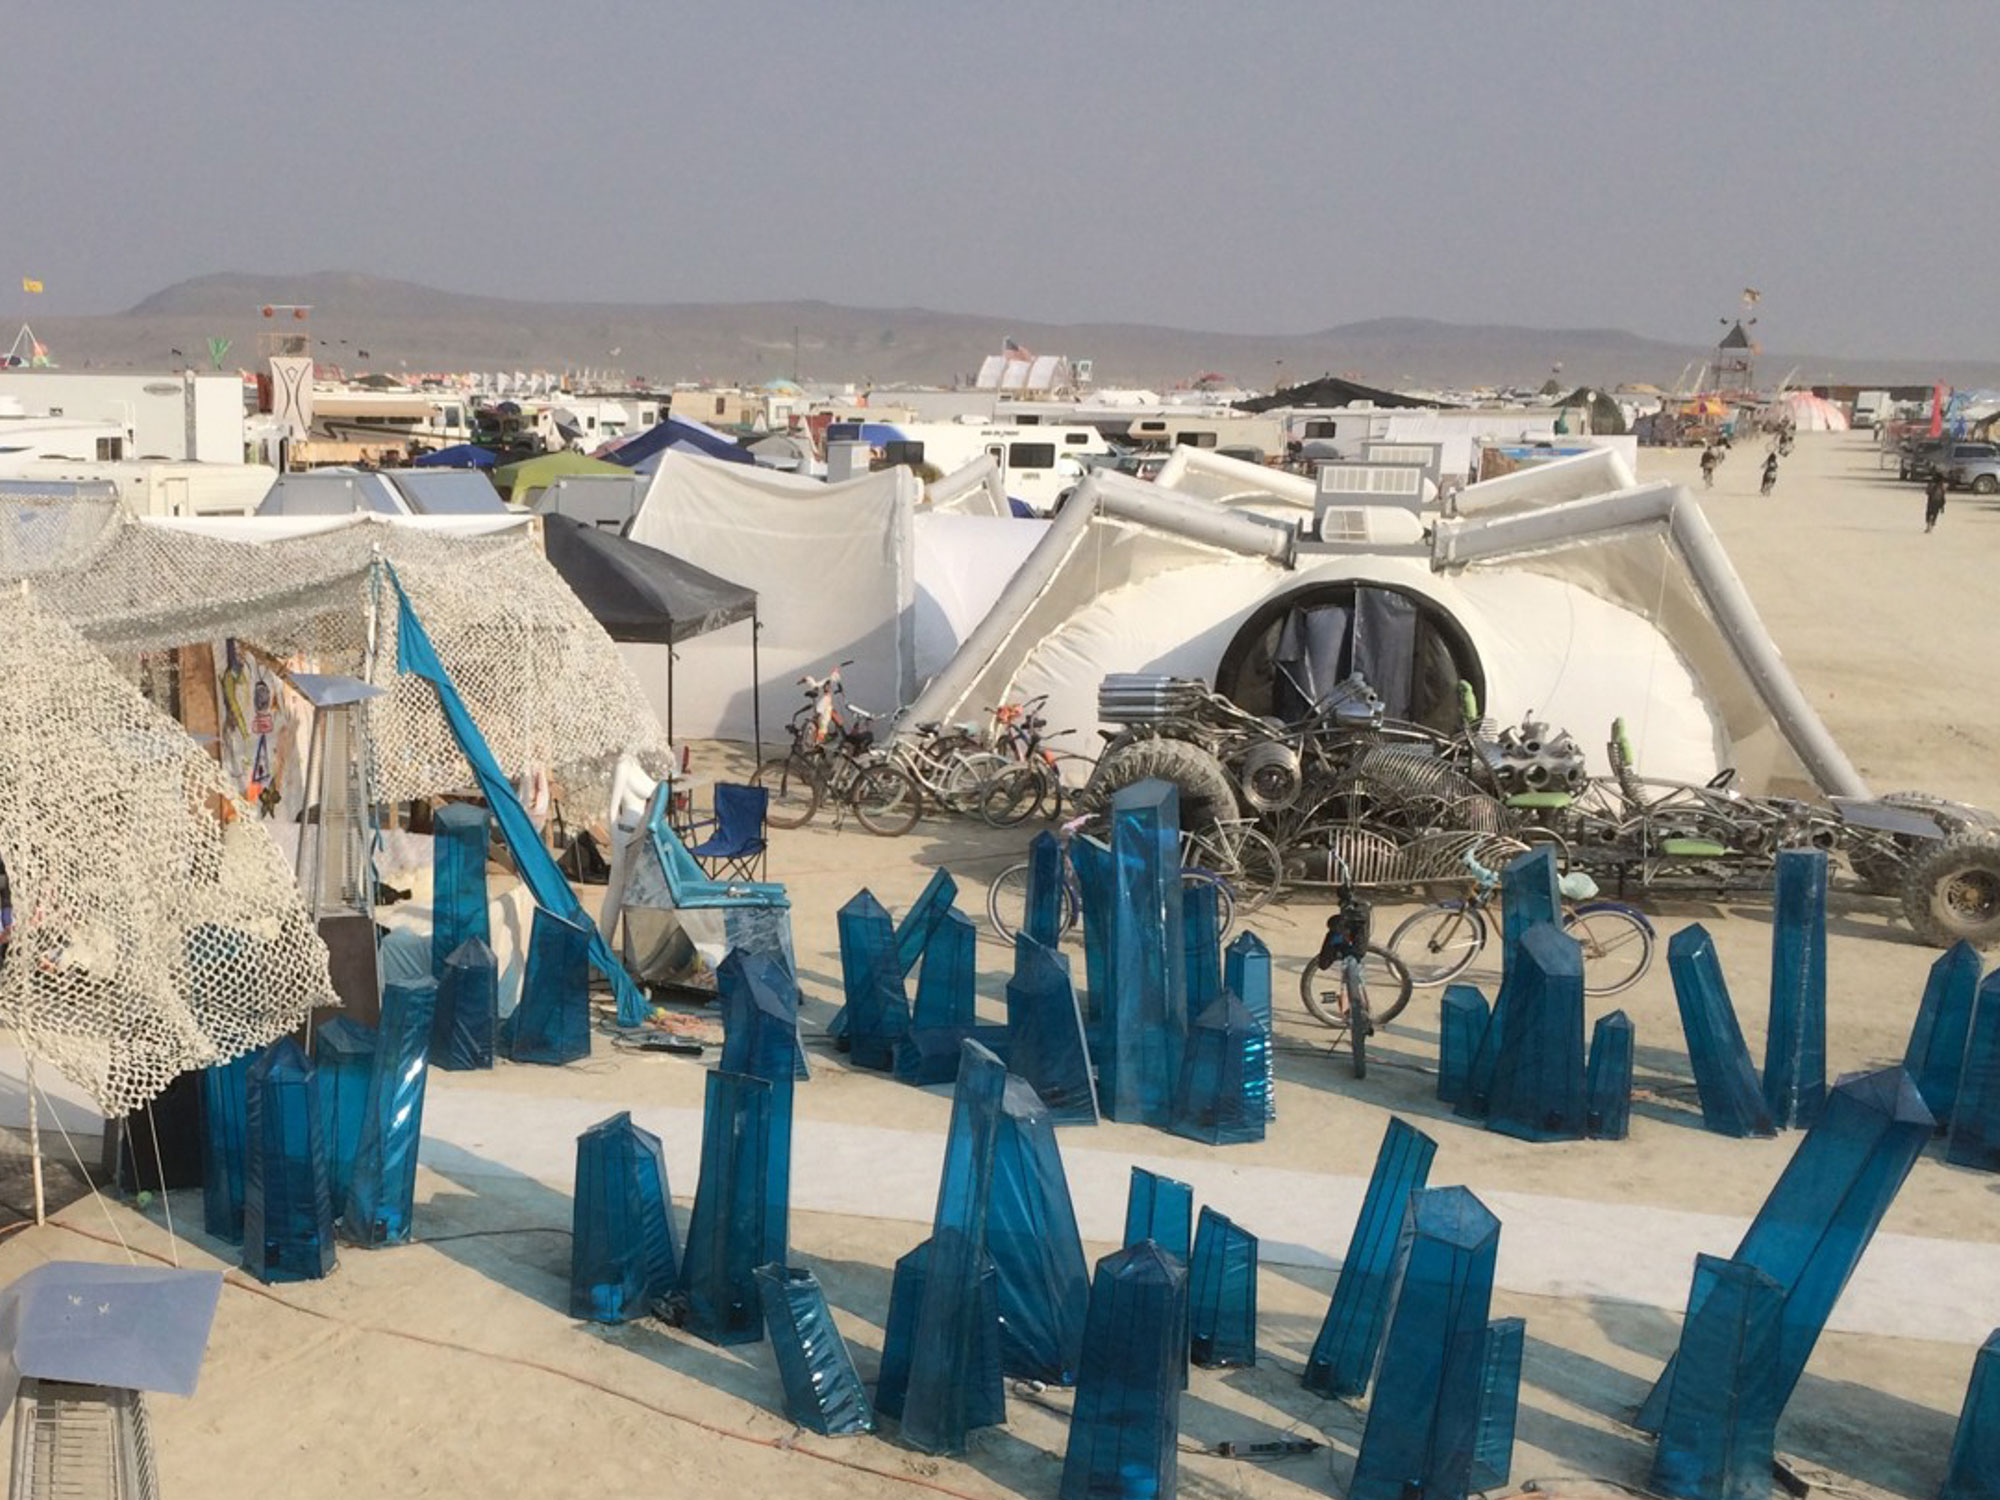 The Dhome inflatable emergency shelter fits right in the harsh artistic environment of the burning man.